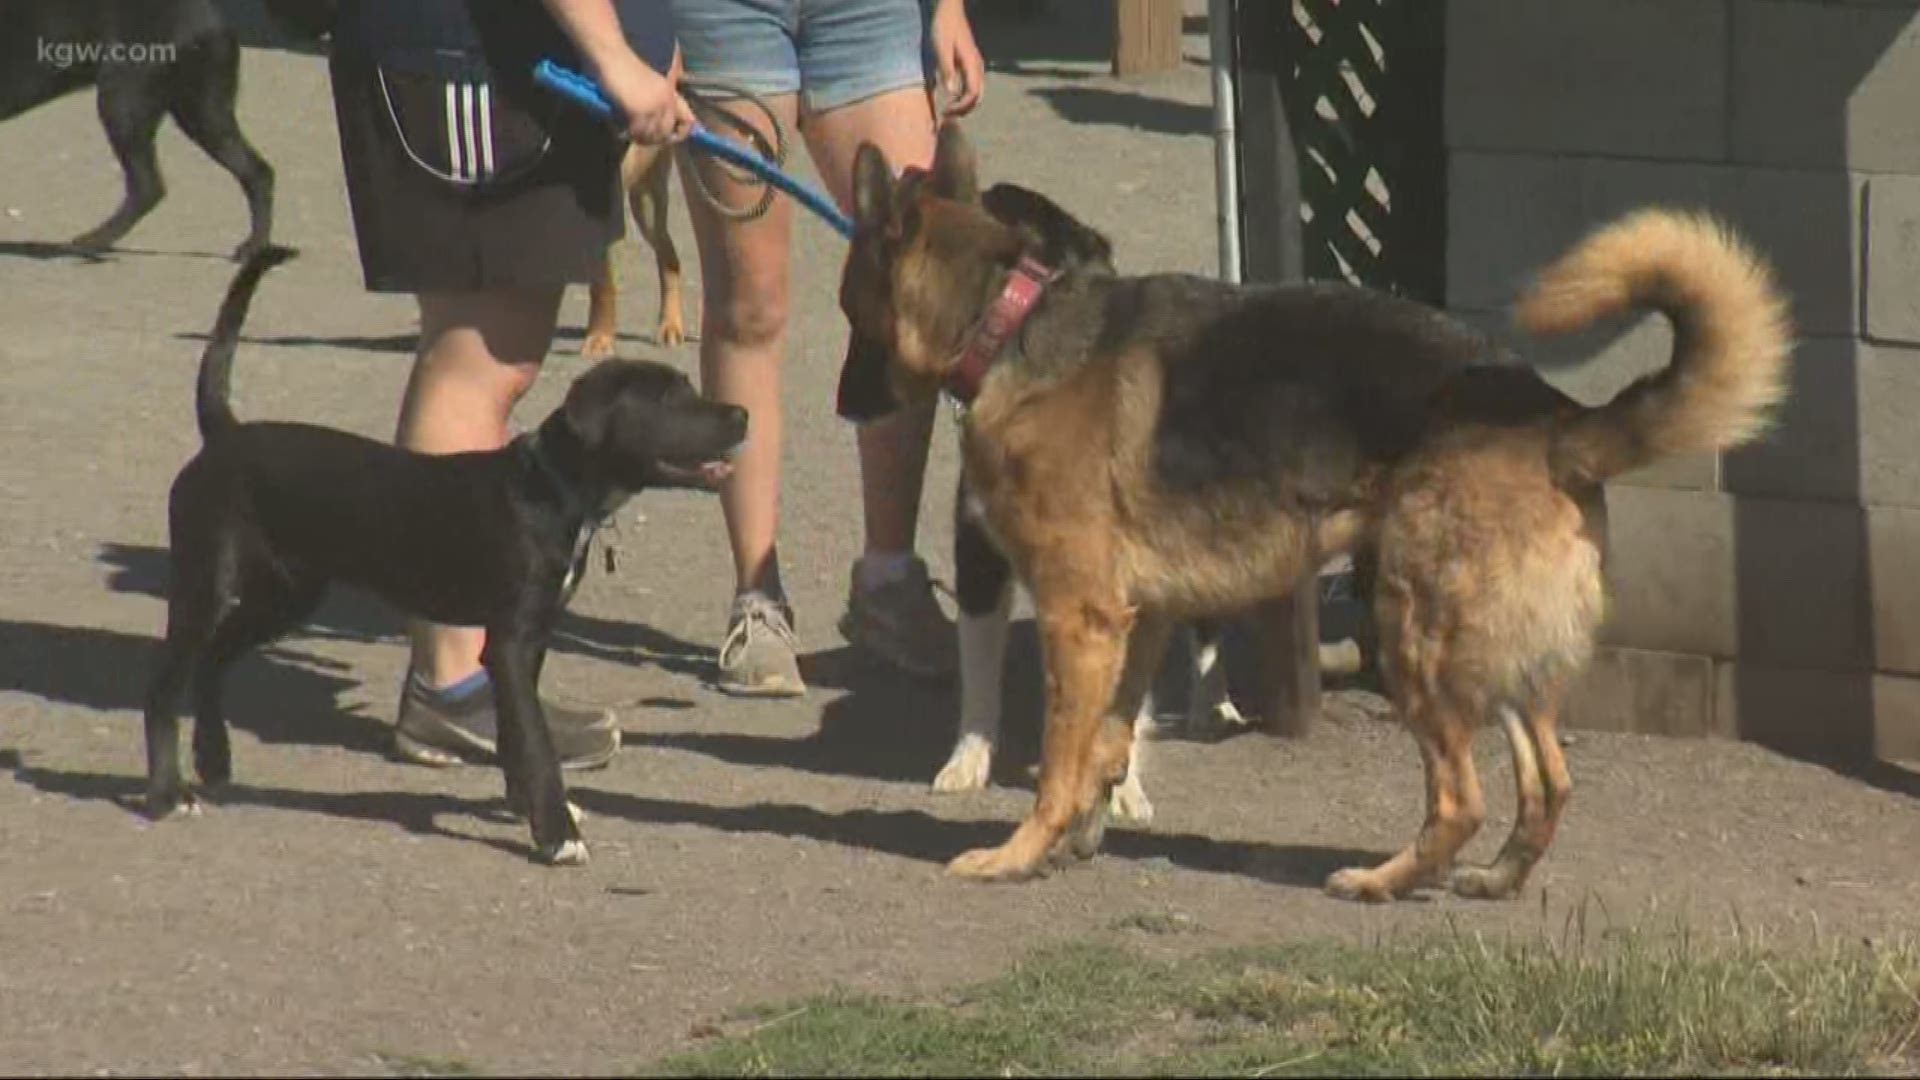 A nonprofit wants the City of Vancouver and Clark County to work toward a plan to make sure dogs and people stay safe at parks.